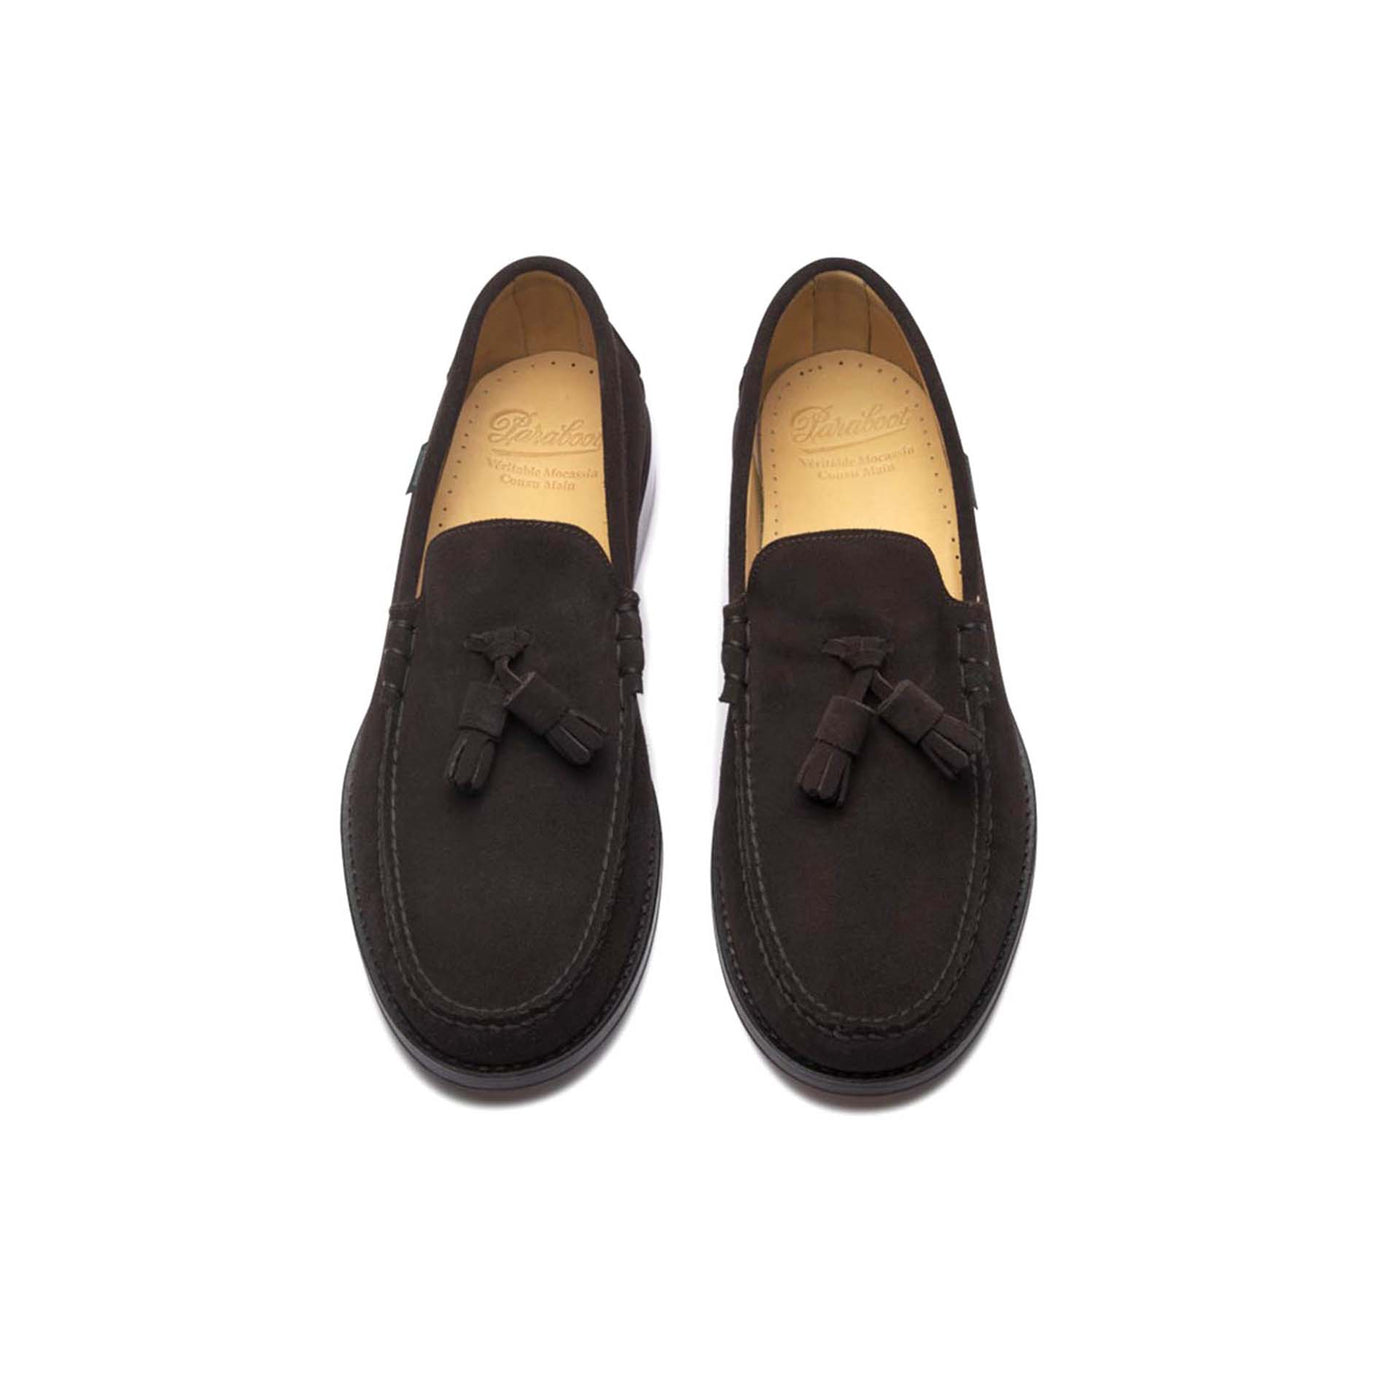 Cornell Loafer - Brown Suede